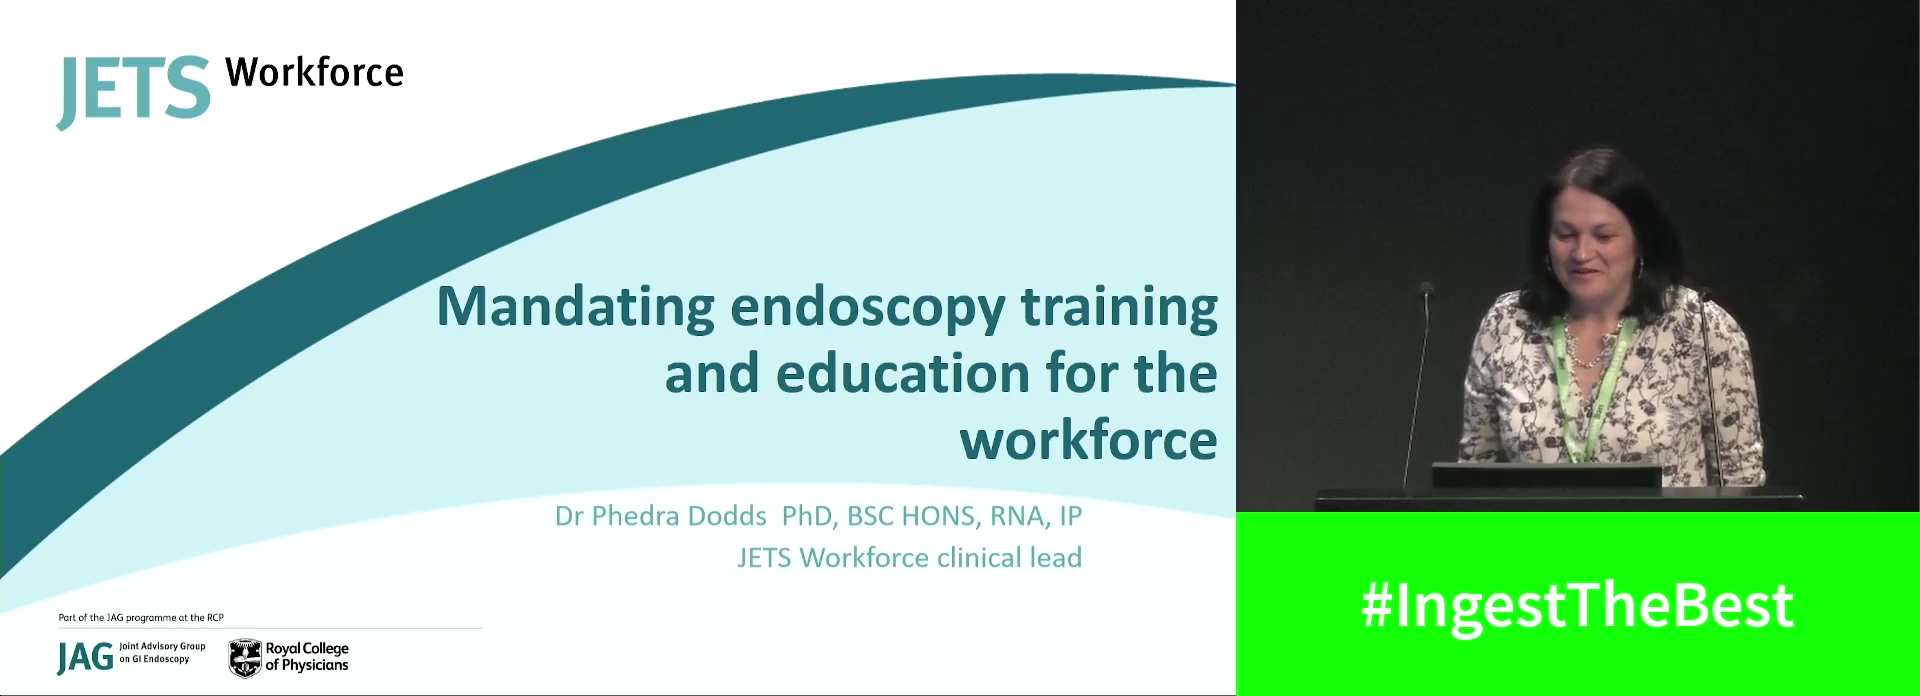 Mandating endoscopy training and education for the workforce: JETS workforce